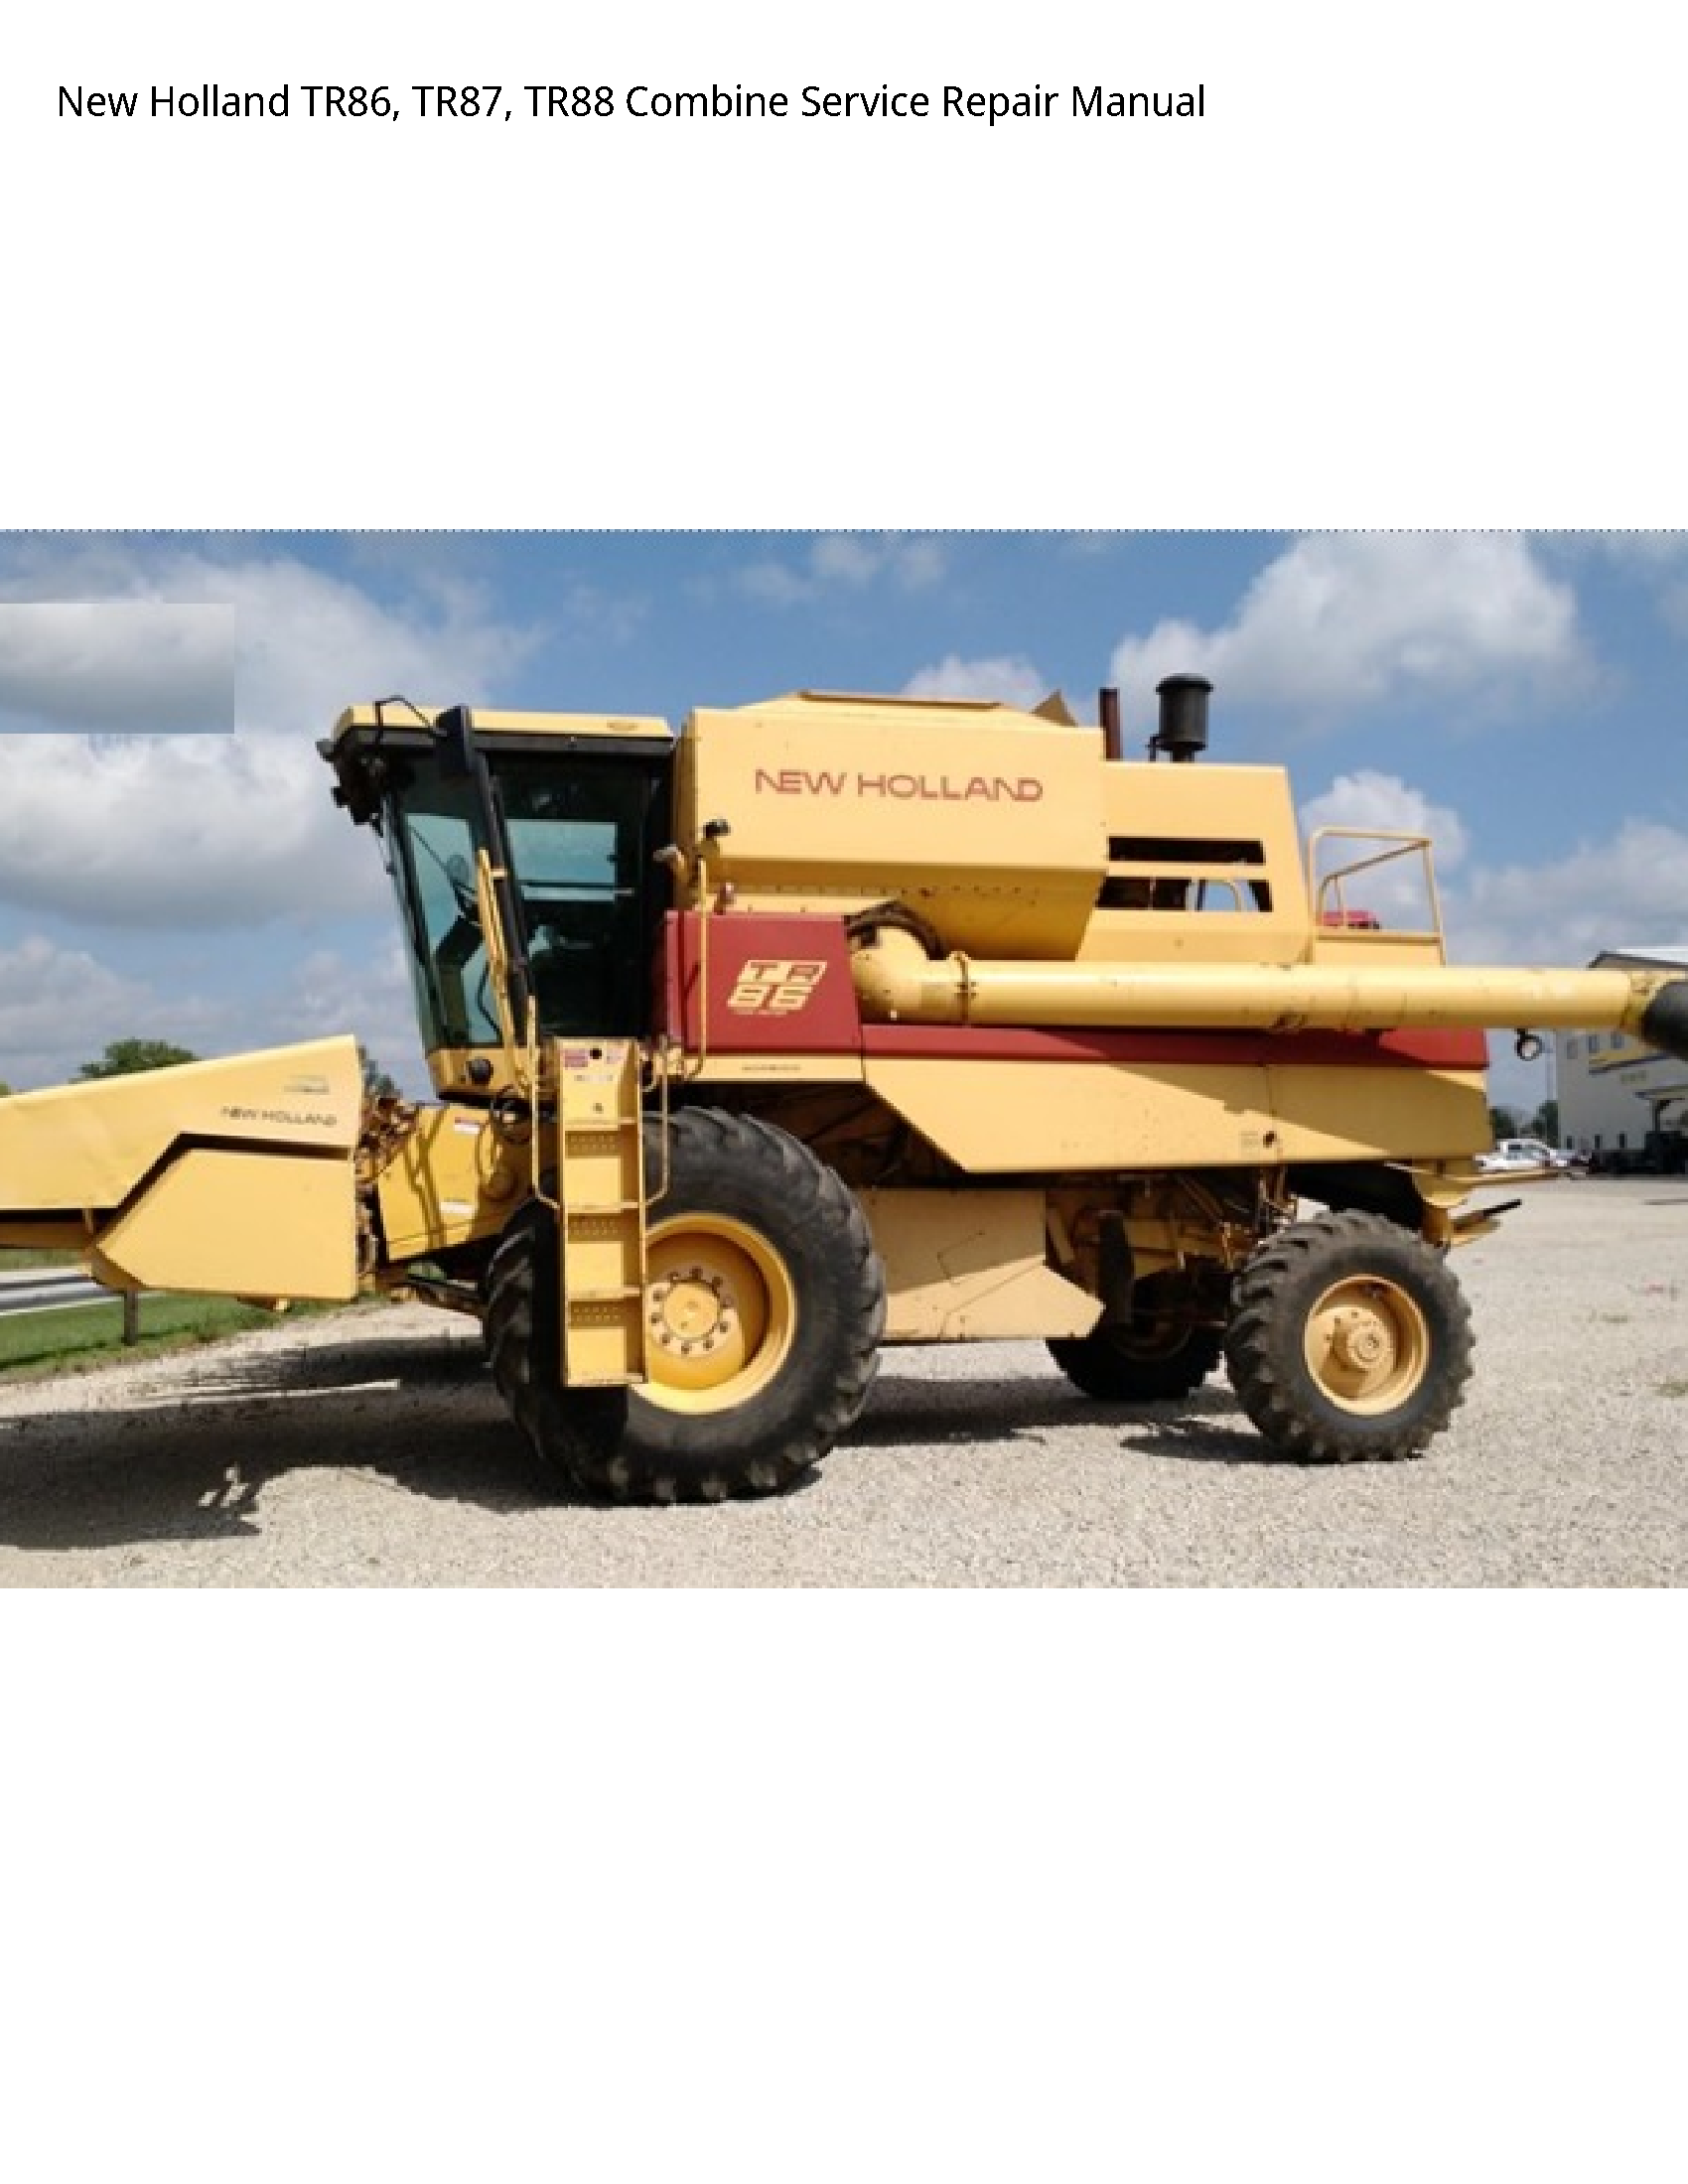 New Holland TR86 Combine manual